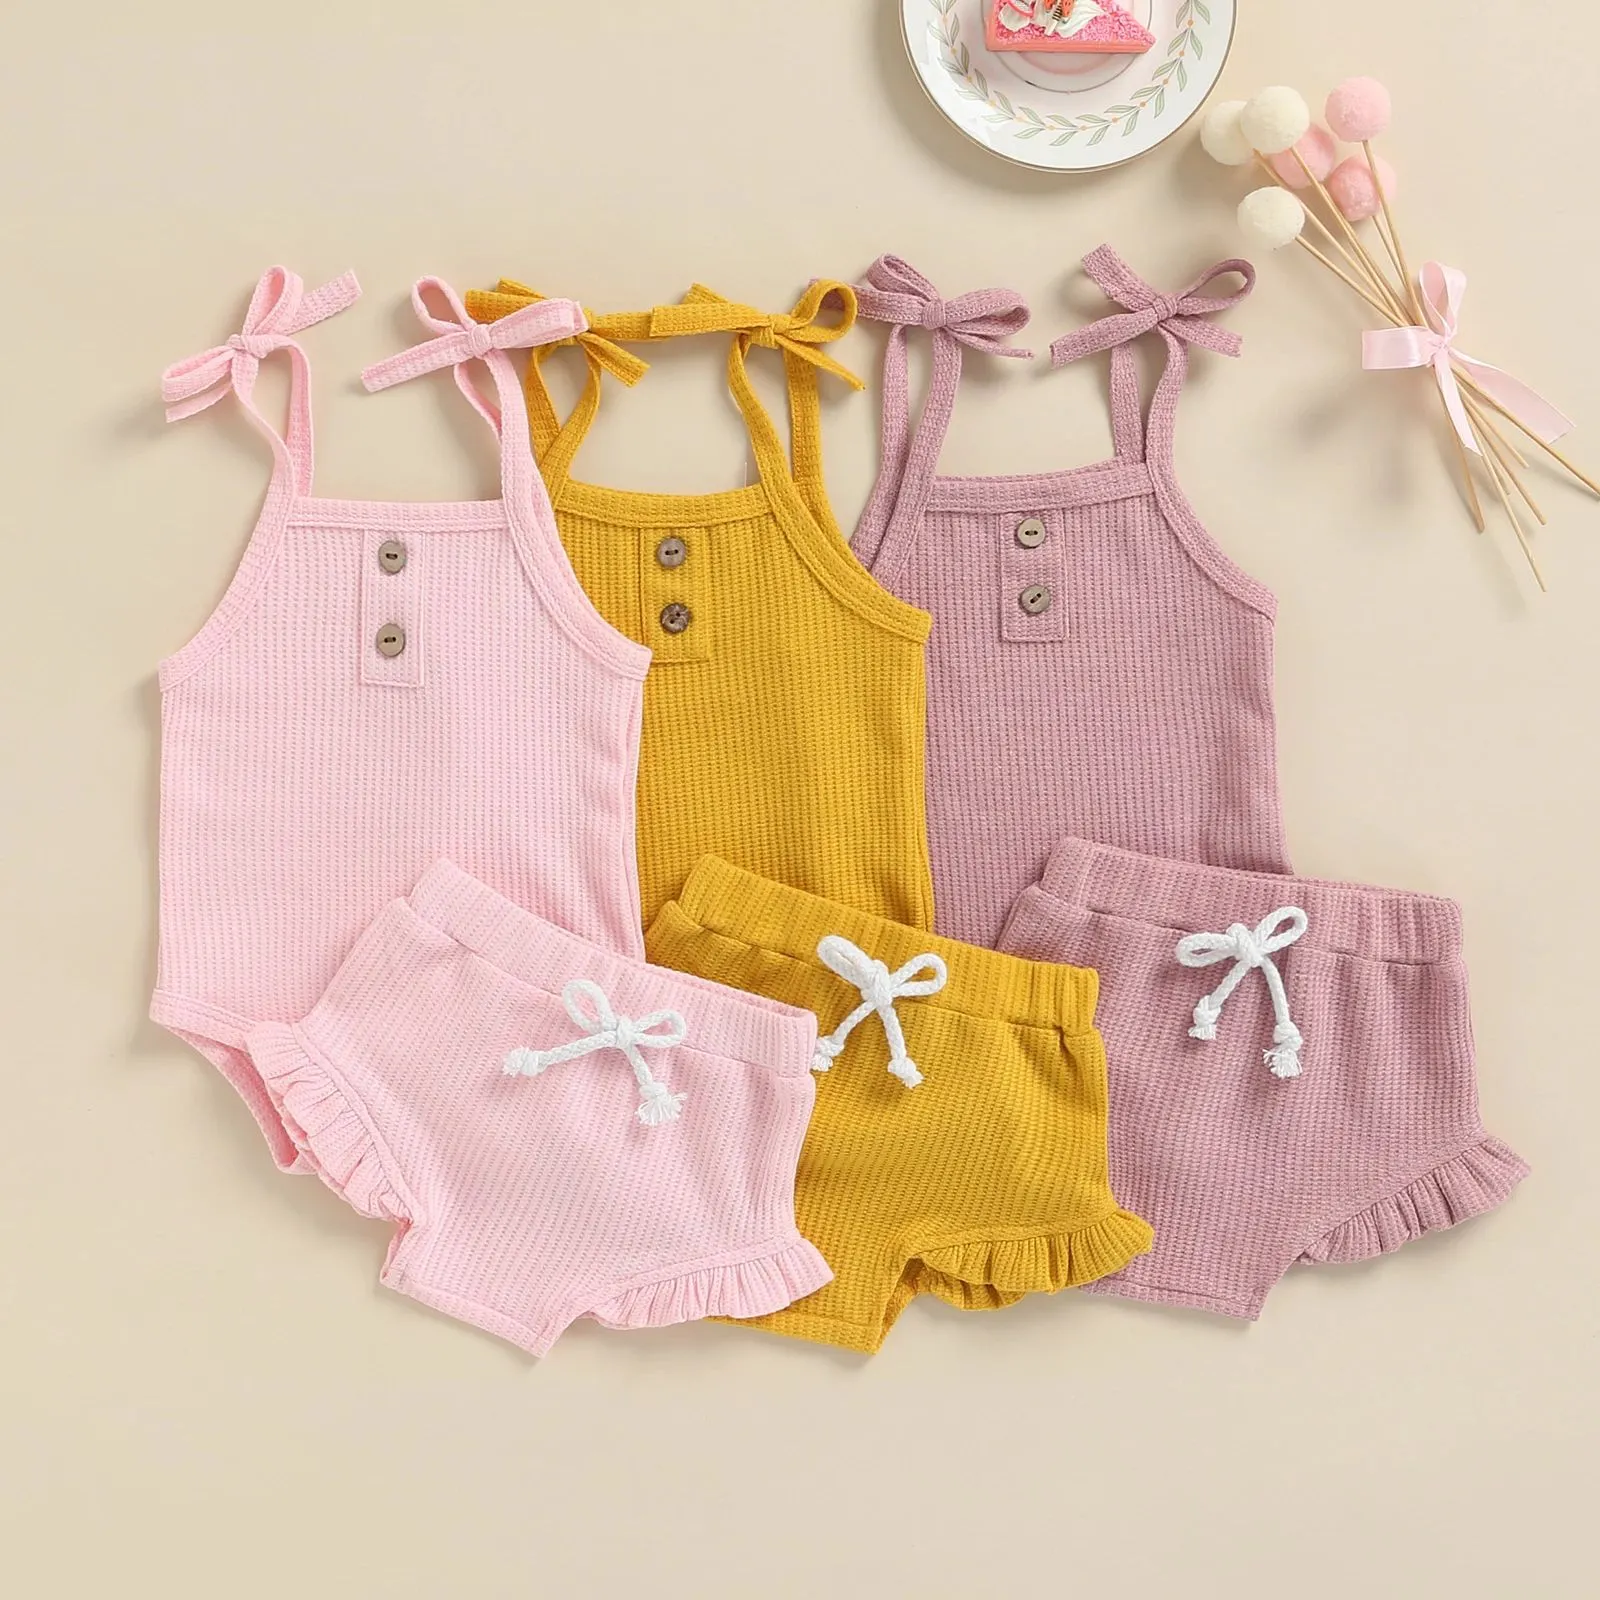 Girls Designer Clothes Kids Summer Waffle Clothing Sets Solid Suspenders Onesies Triangle Pants Suits Casual Boutique Rompers Briefs Outfits B8106